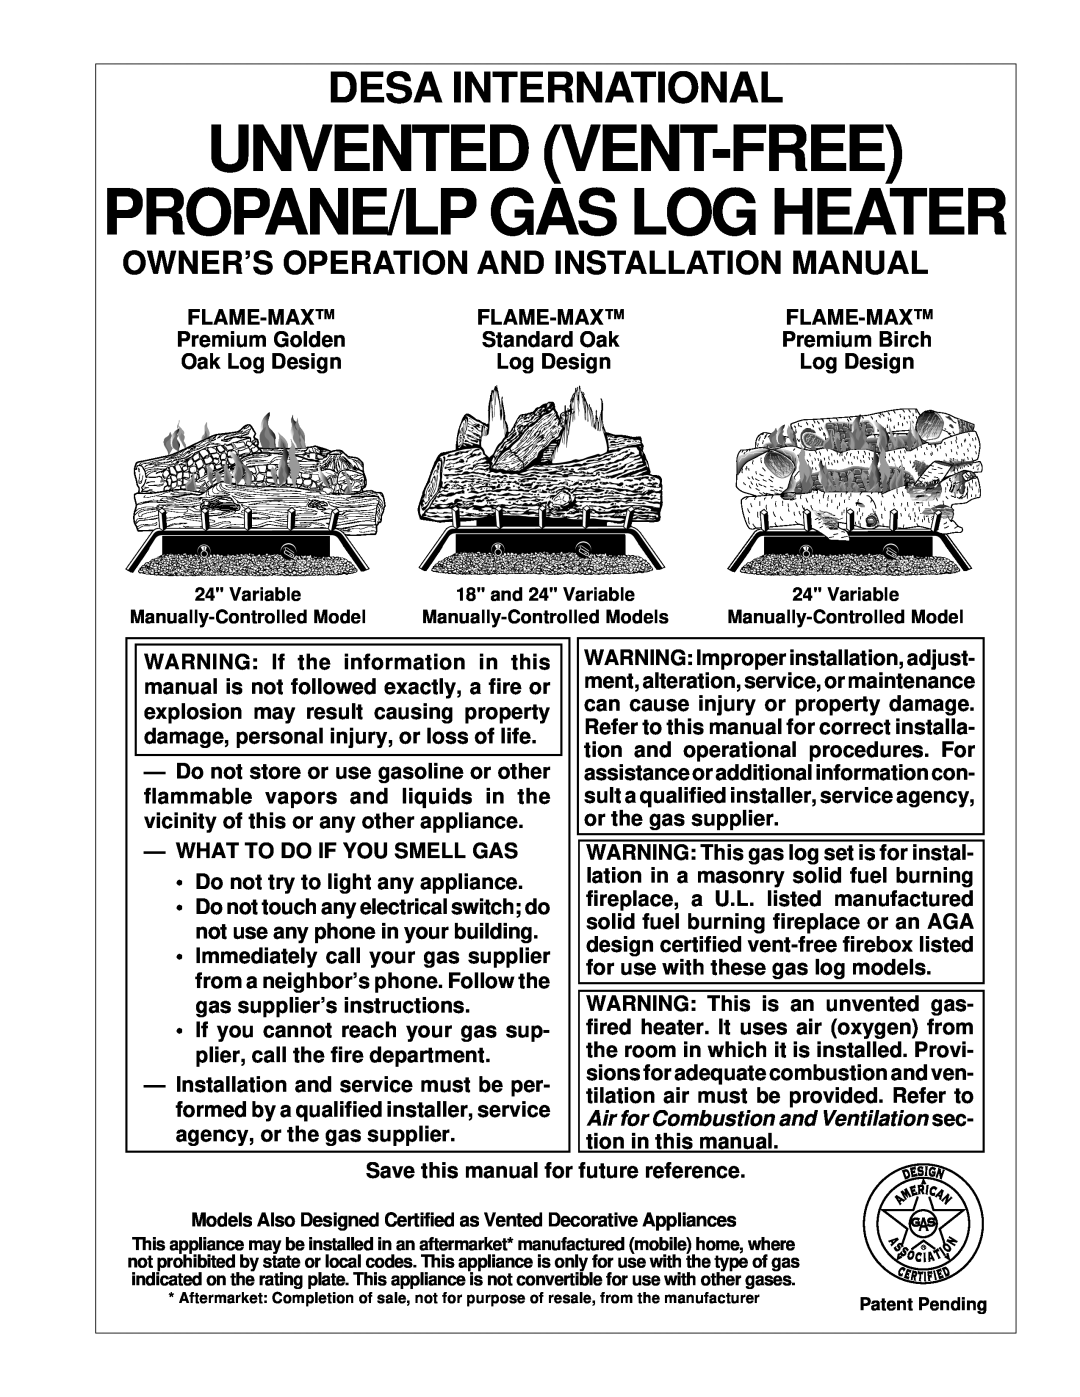 Desa UNVENTED (VENT-FREE) PROPANE/LPGAS LOG HEATER installation manual Owner’S Operation And Installation Manual 